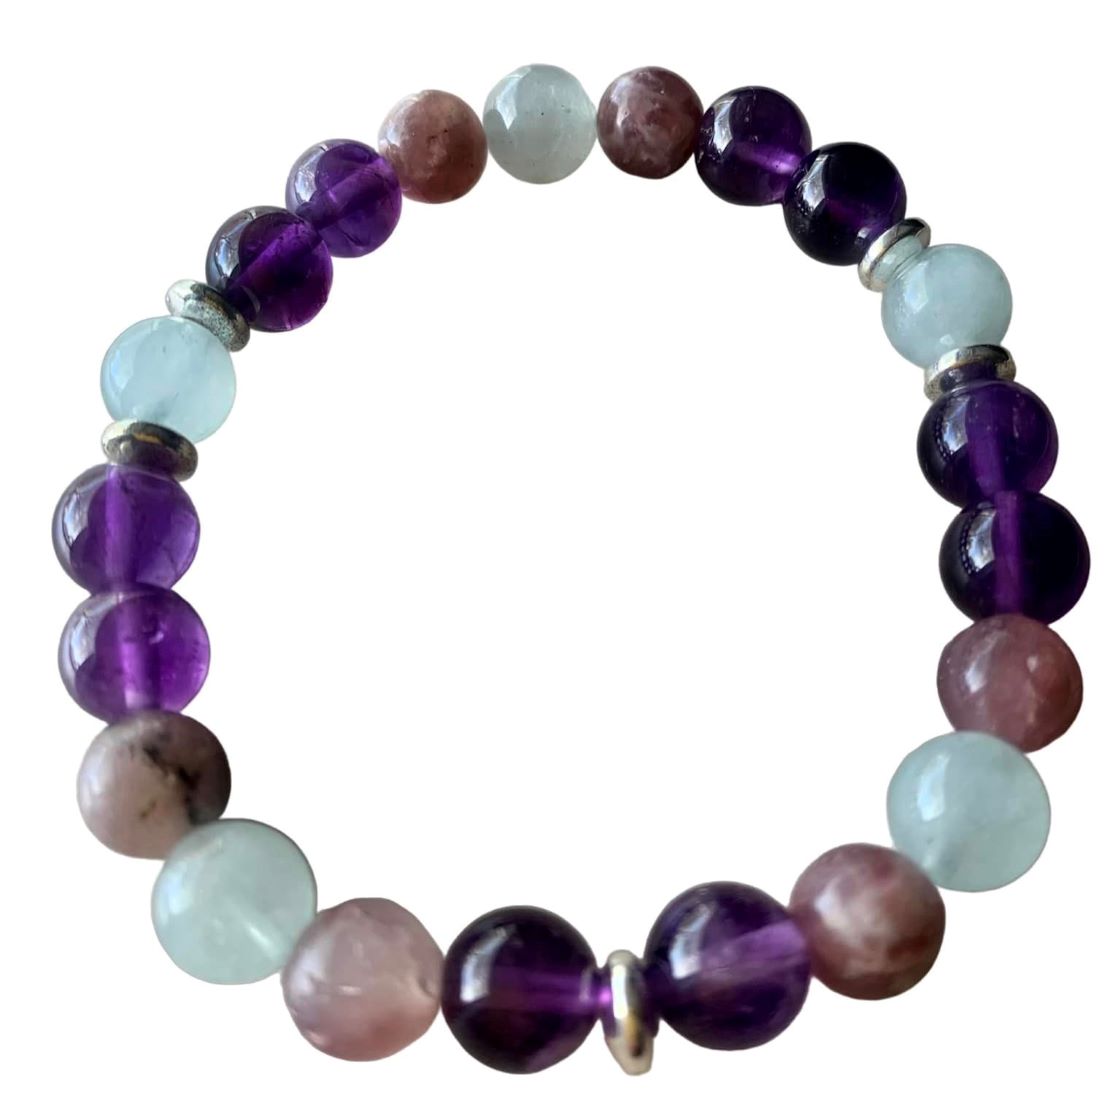 Healing Crystal Bracelets Anxiety Buster with Amethyst, Aquamarine, and Lepidolite